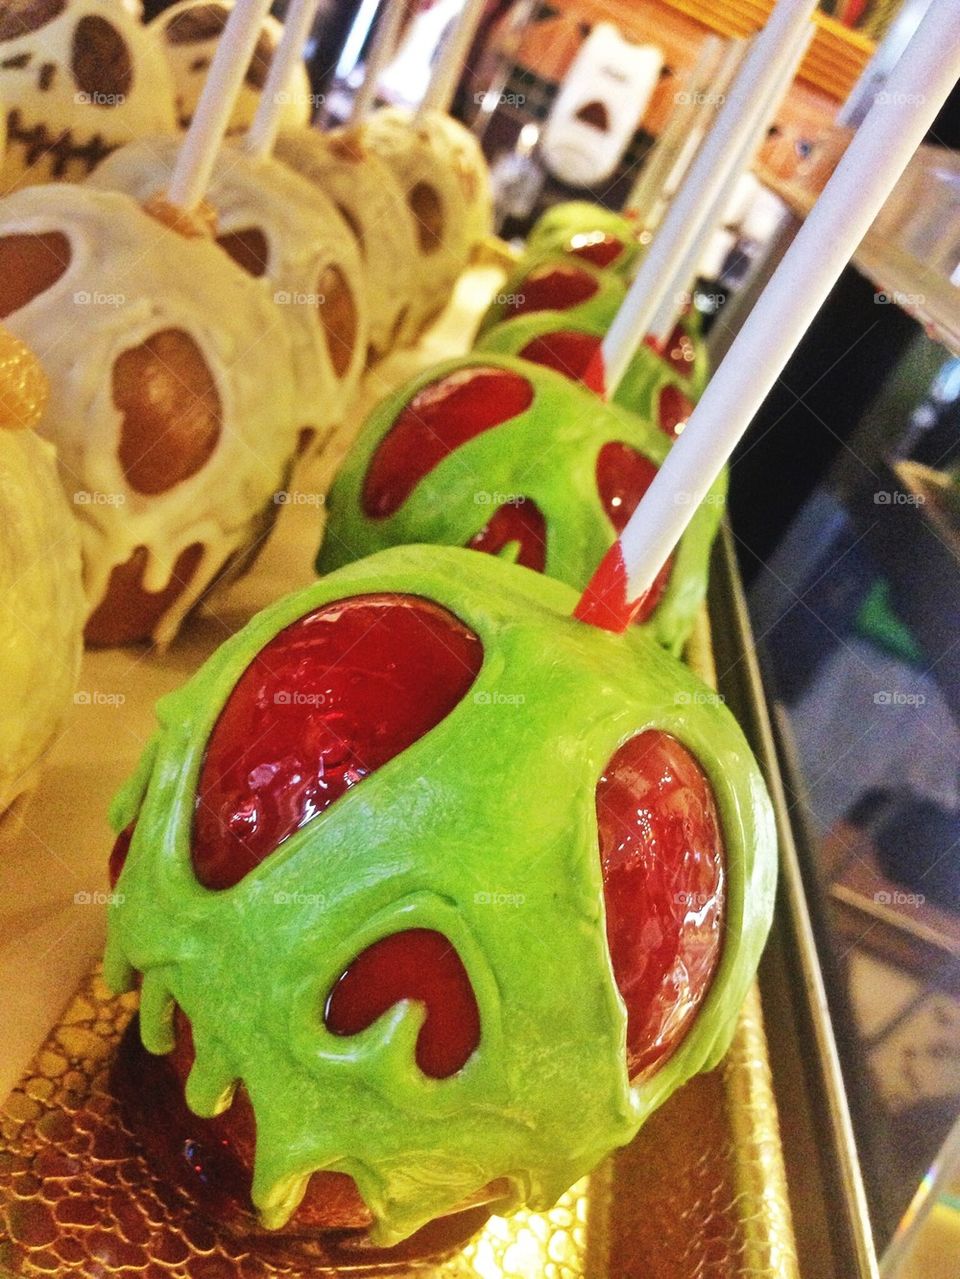 Poison Candy Apples